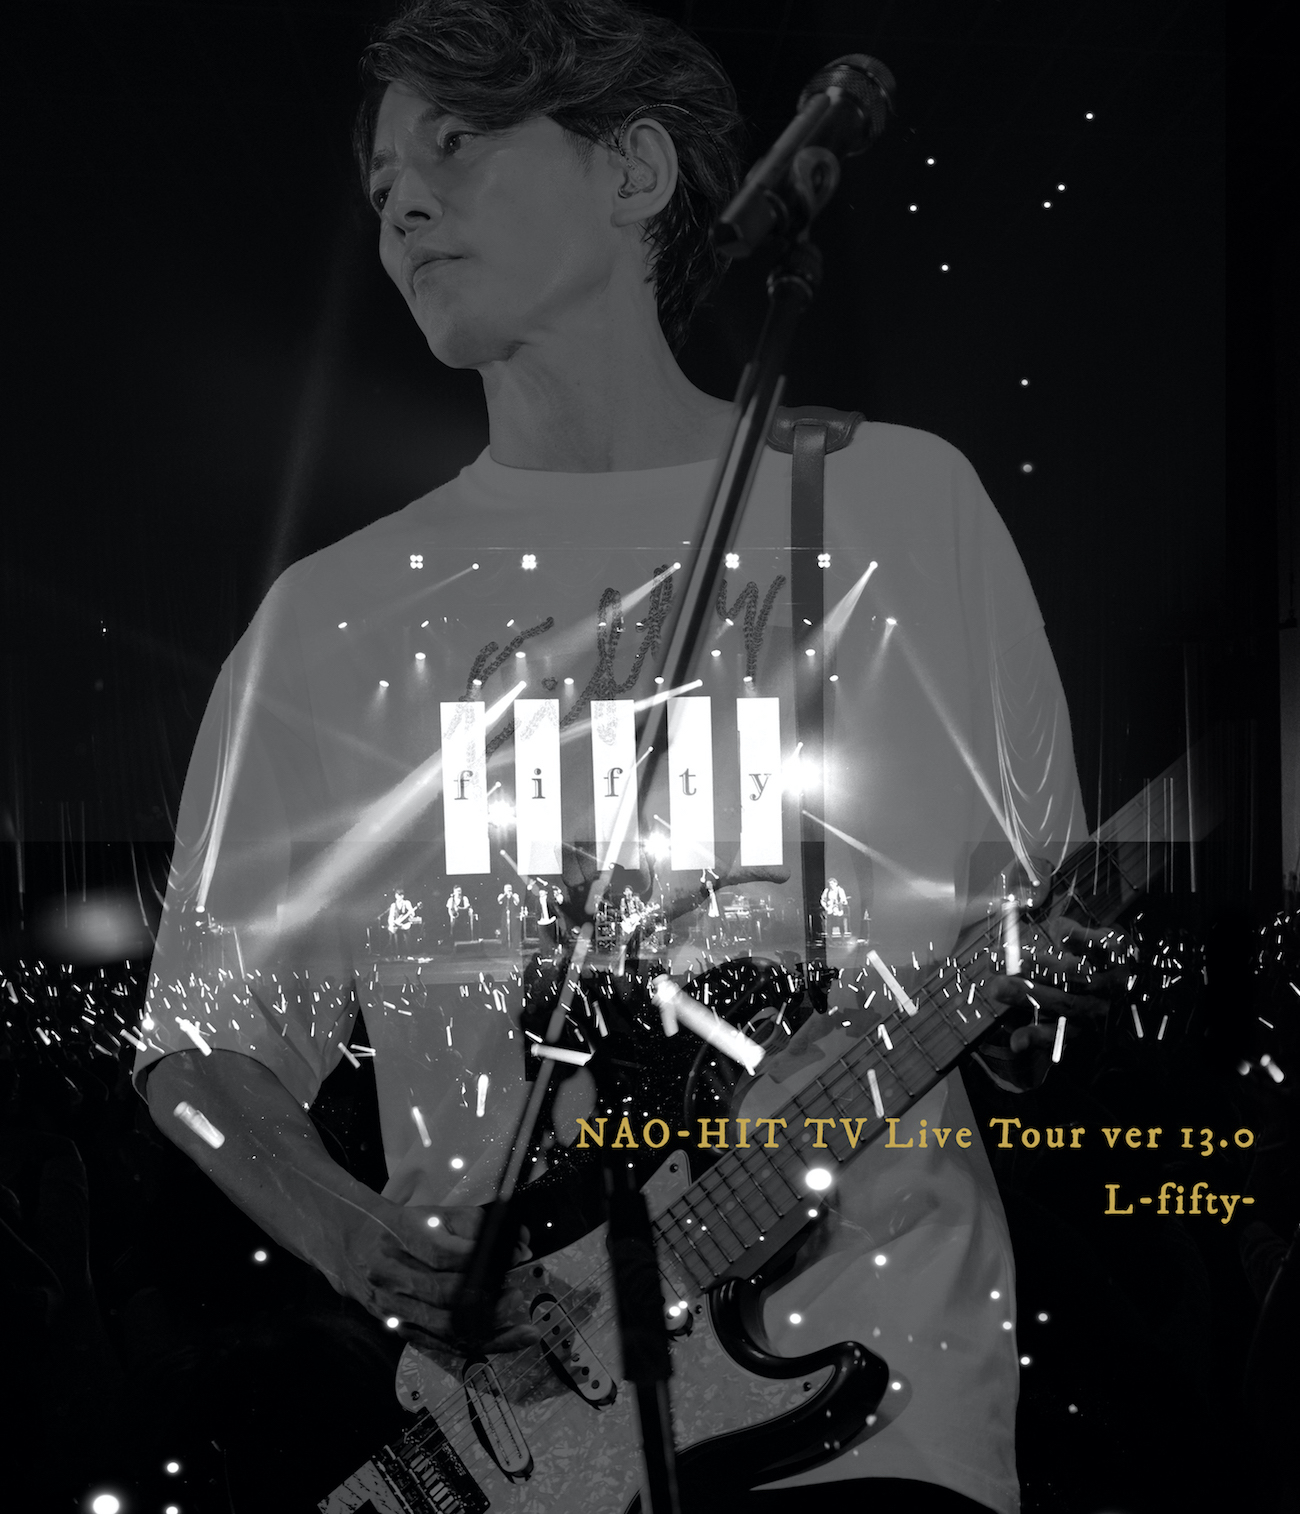 『NAO-HIT TV Live Tour ver13.0〜L –fifty- 〜』通常盤